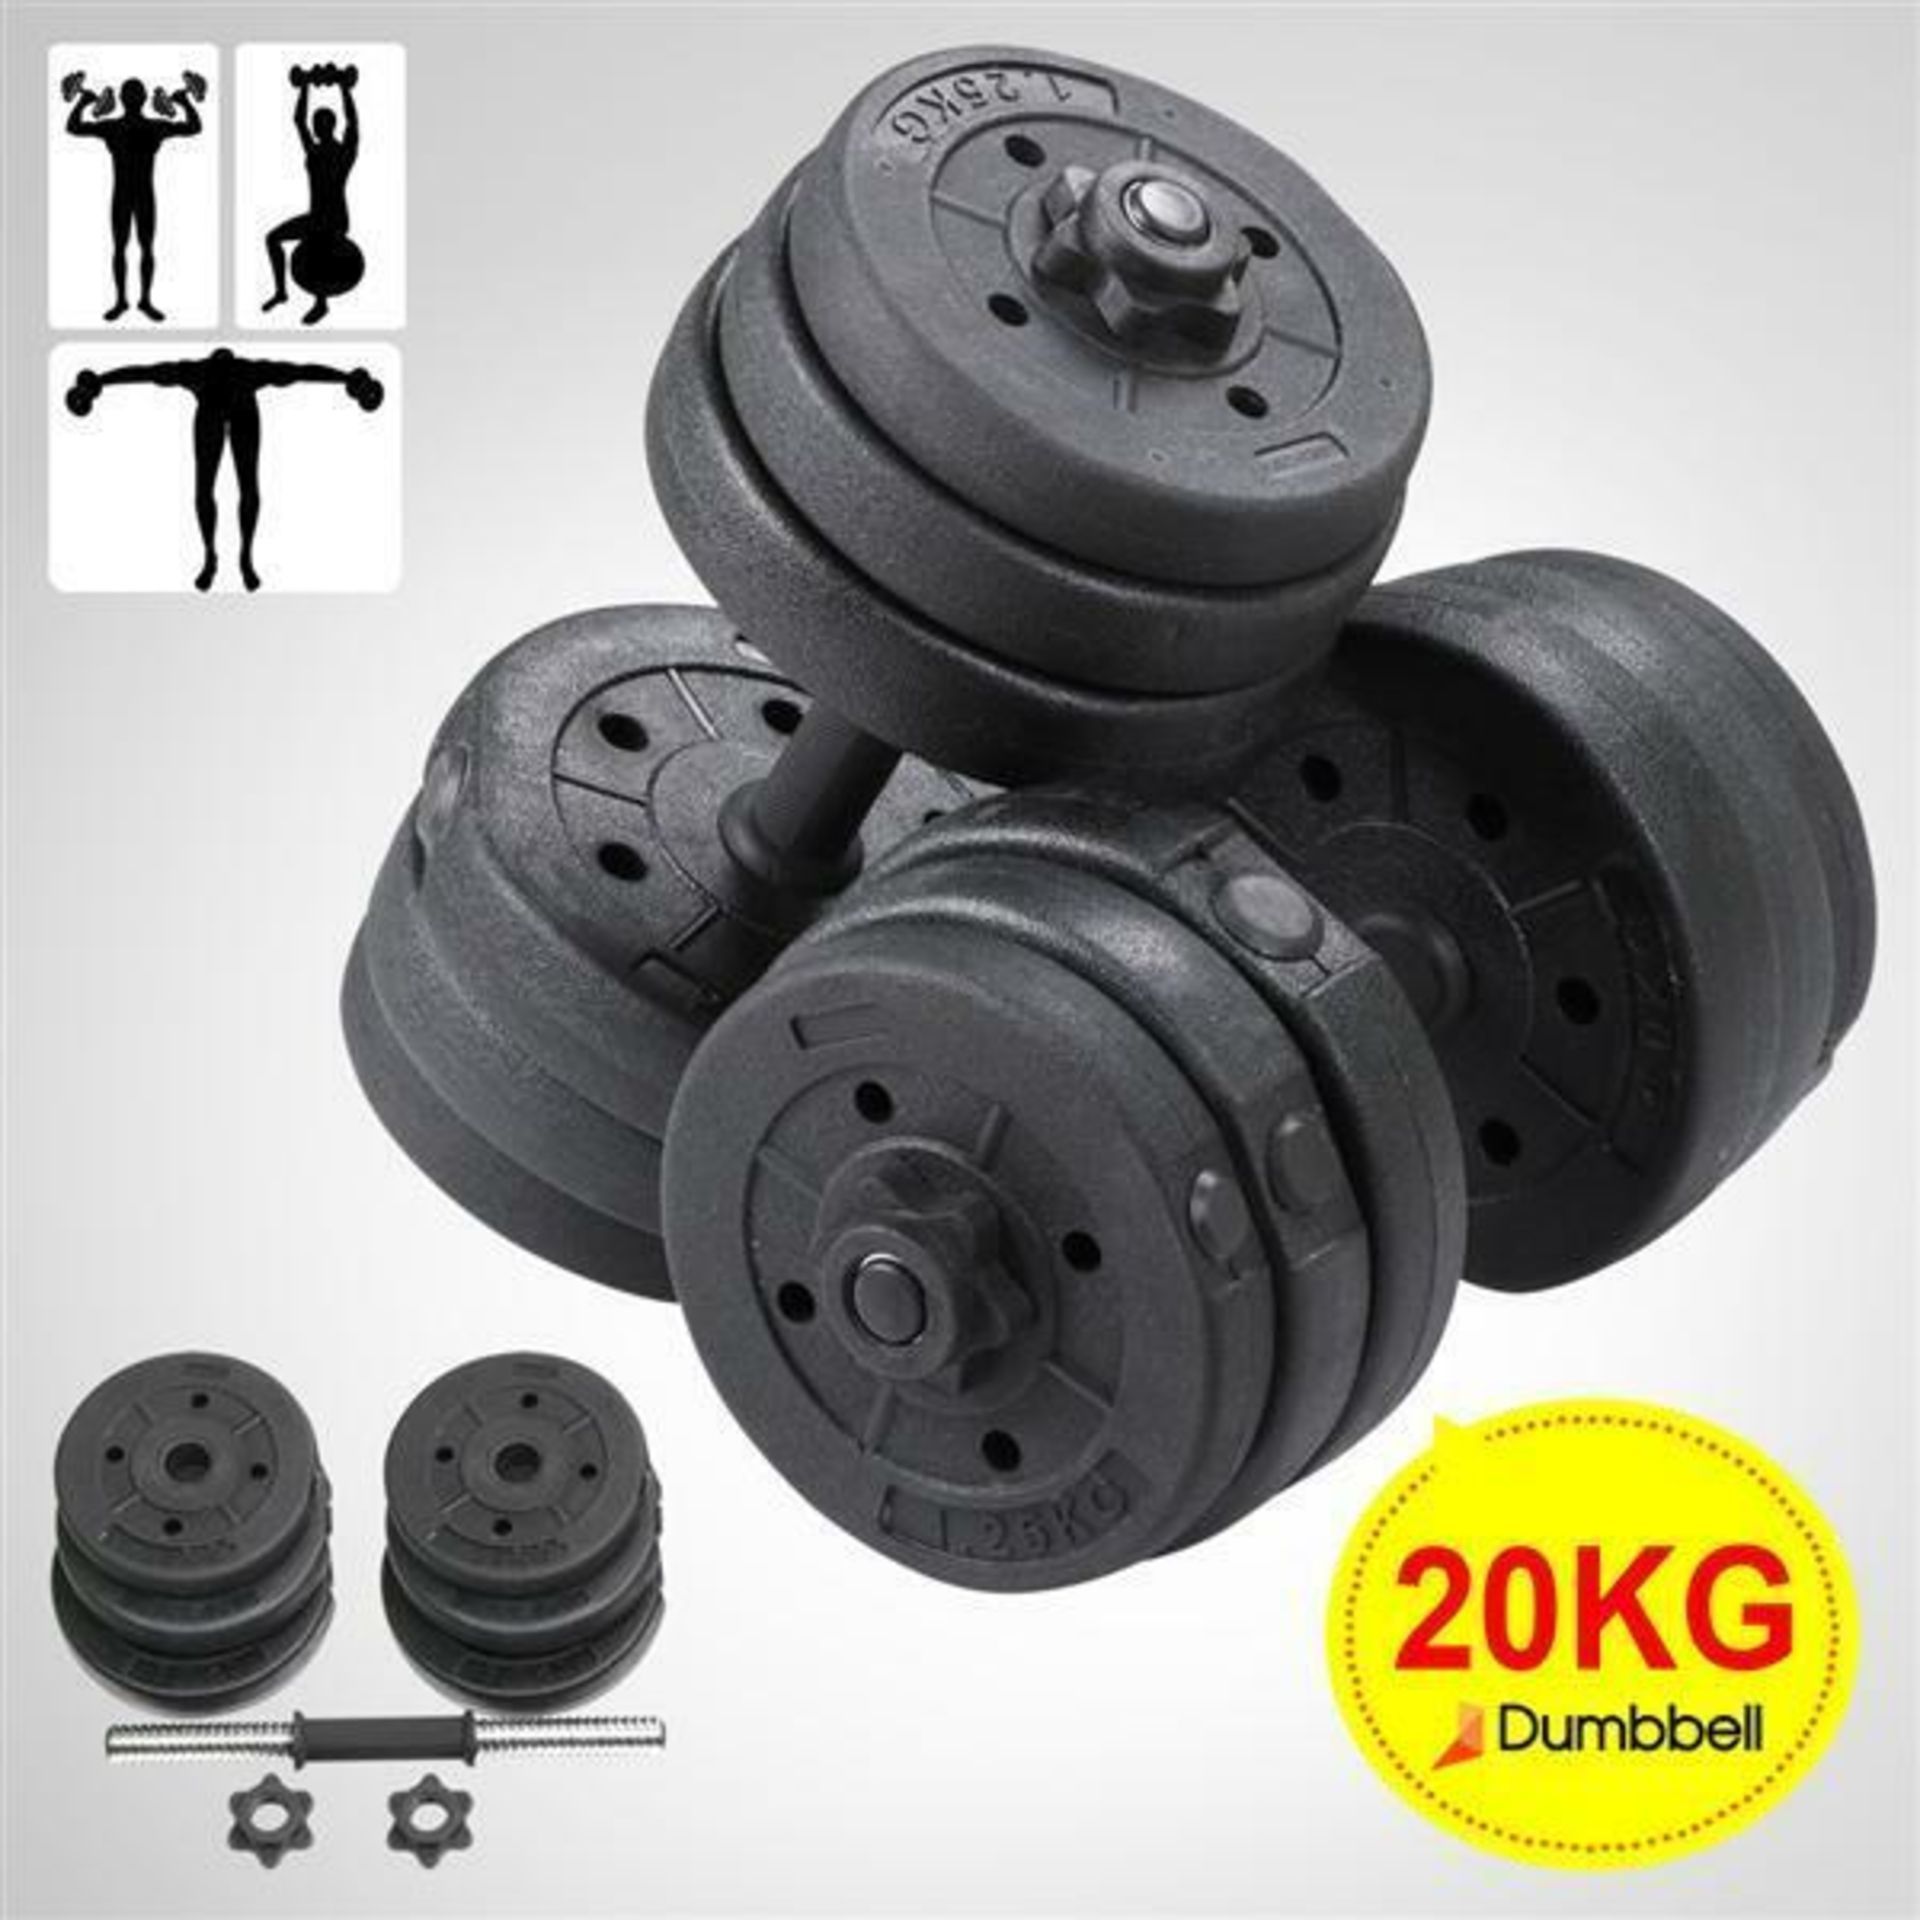 PALLET TO CONTAIN 36 x SETS OF 2 - 20KG ADJUSTABLE WEIGHT DUMBBELL SETS. (PALLET ID: 17) EACH SET